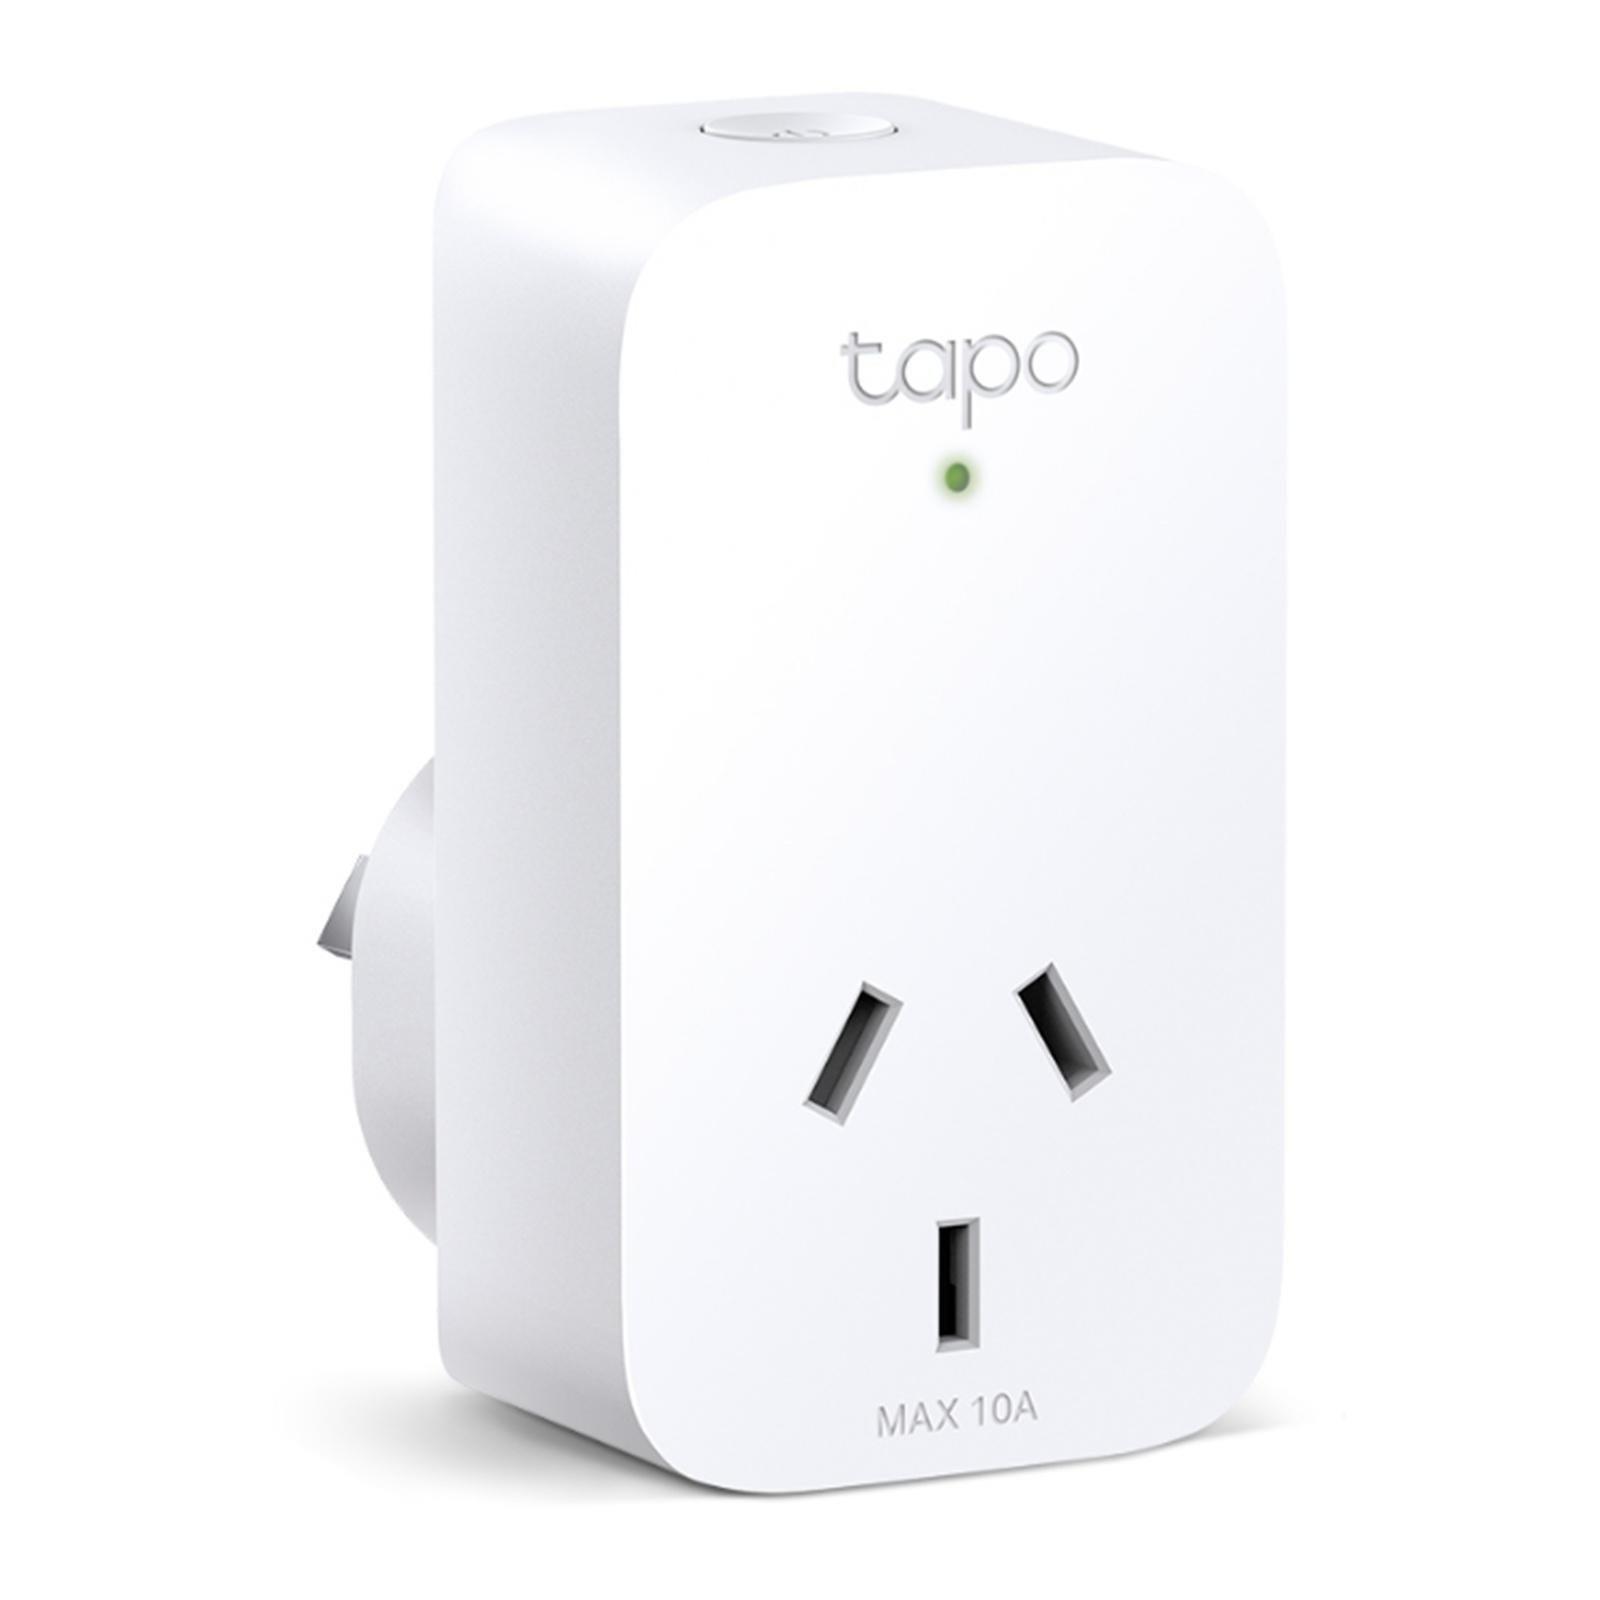 TP-Link Tapo P110 Wi-Fi Smart Plug with Energy Monitoring